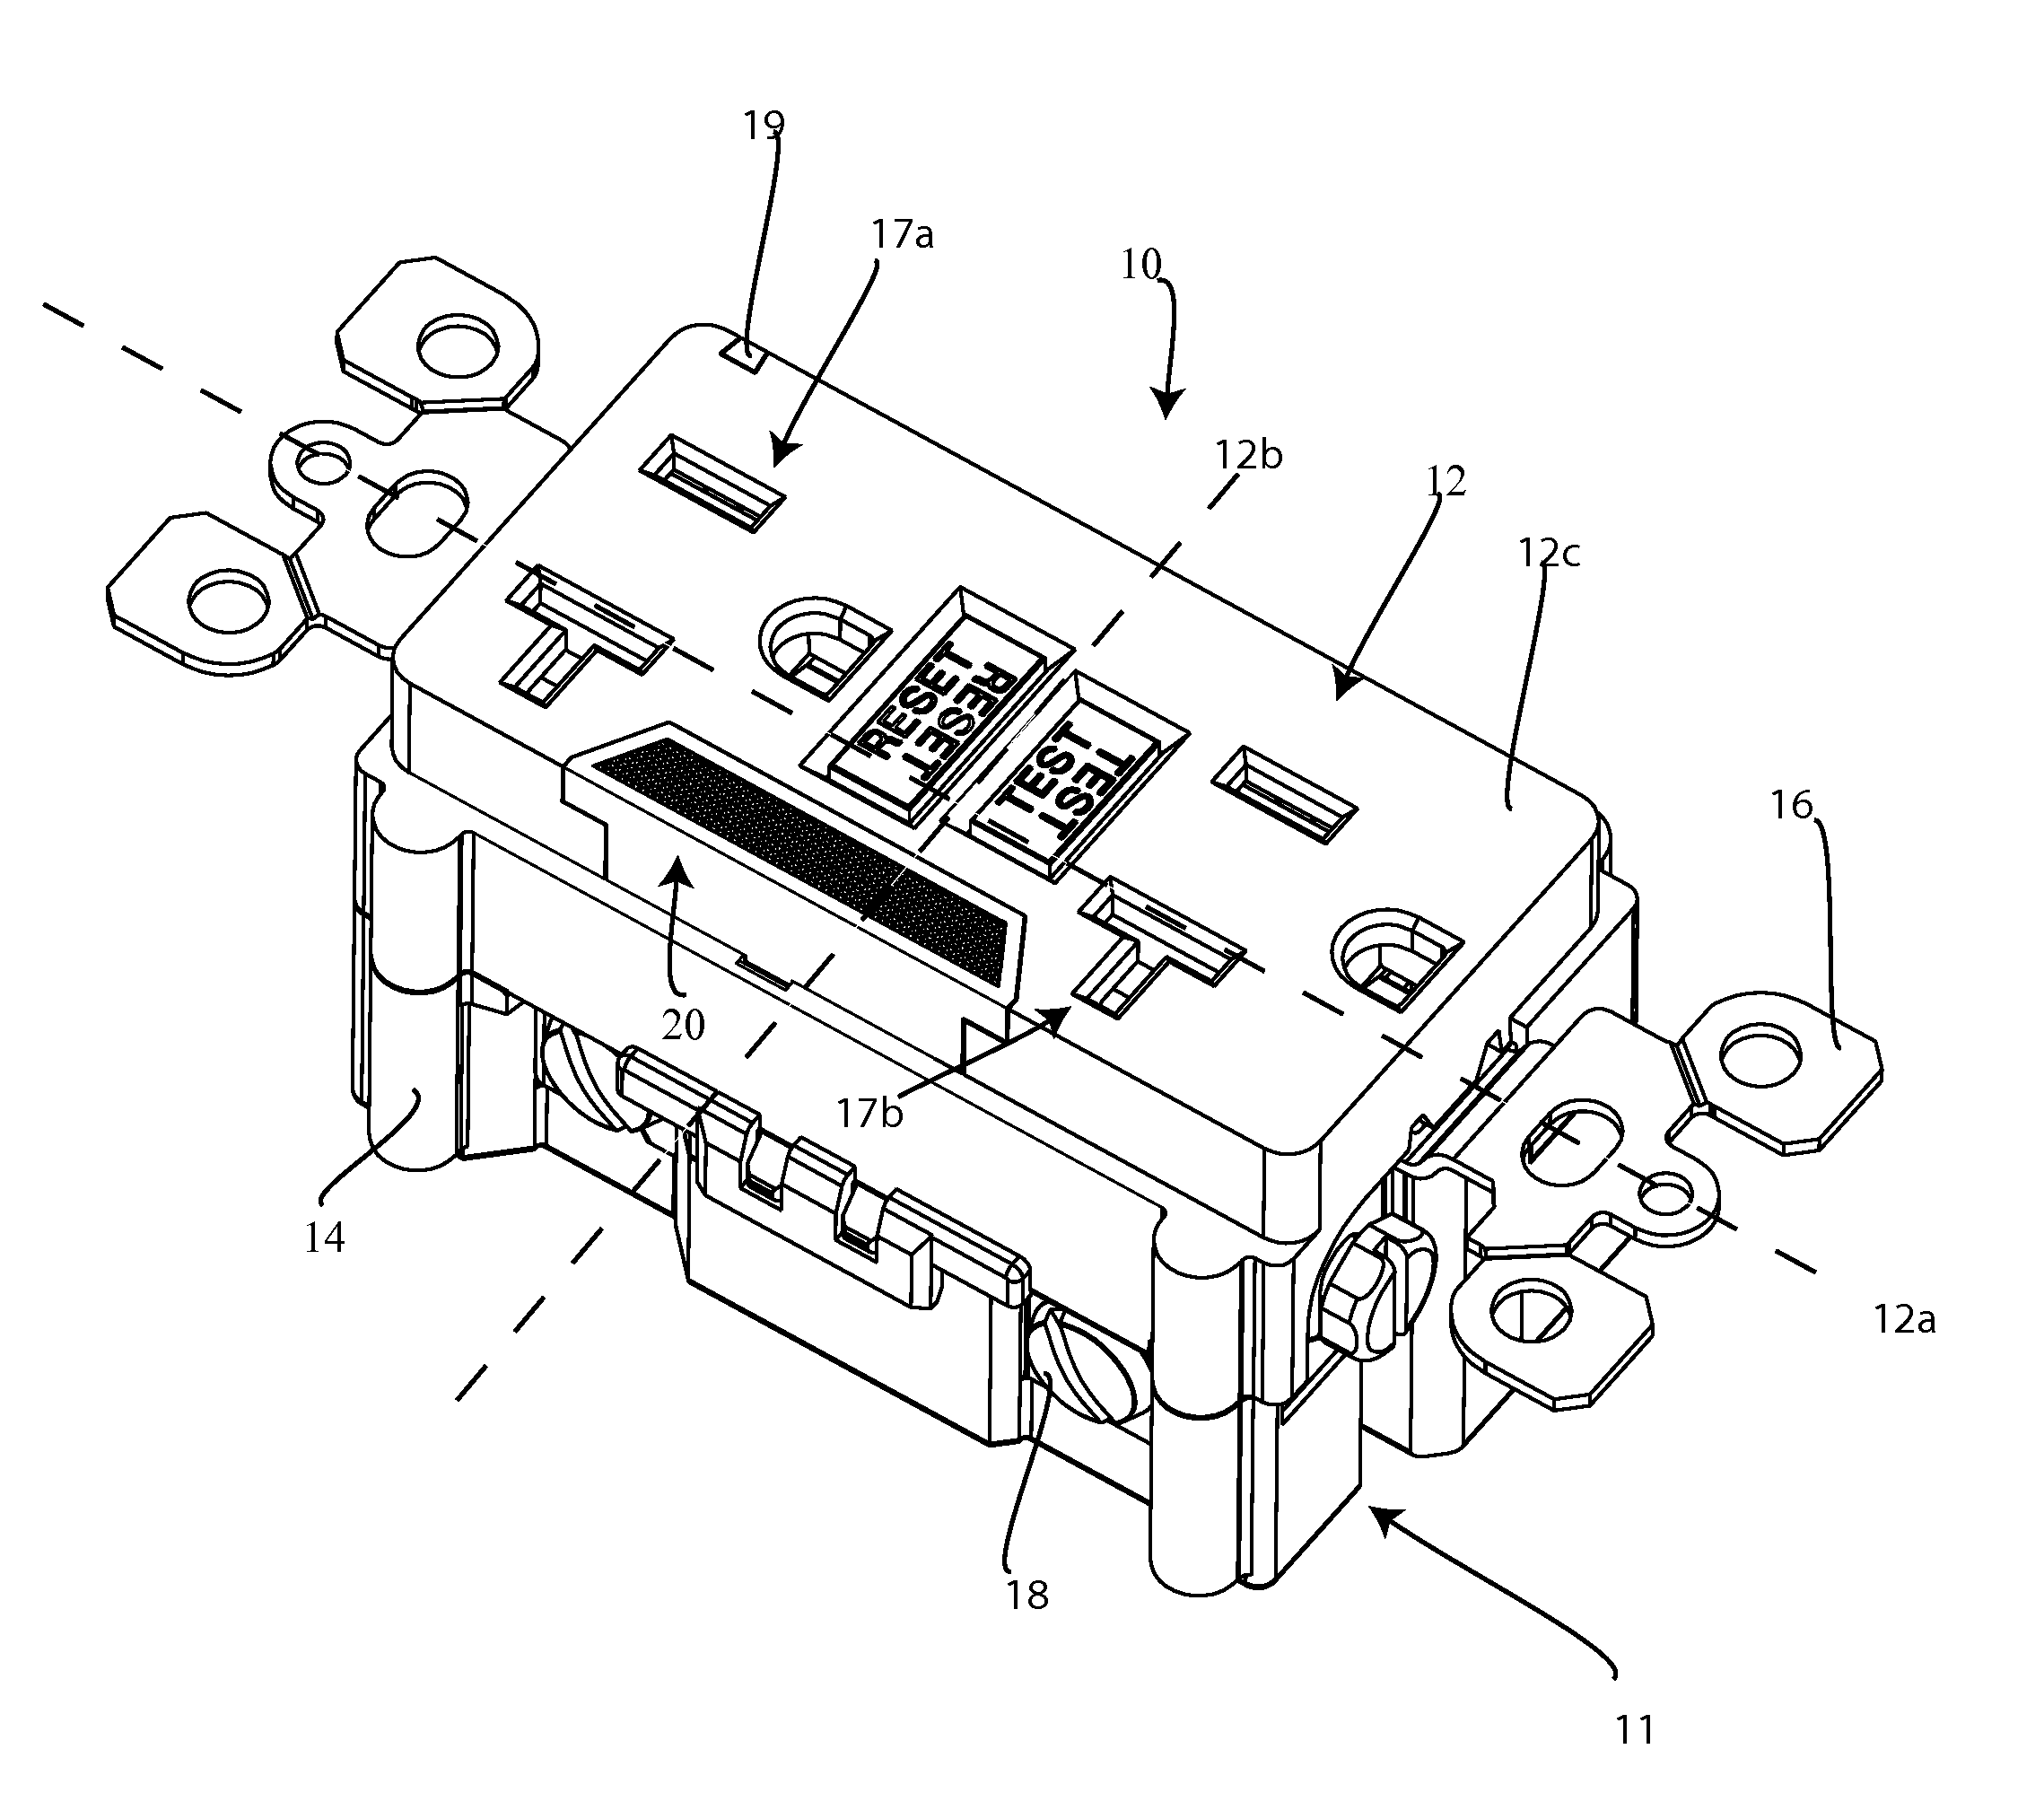 Combination device including a guide light and an electrical component